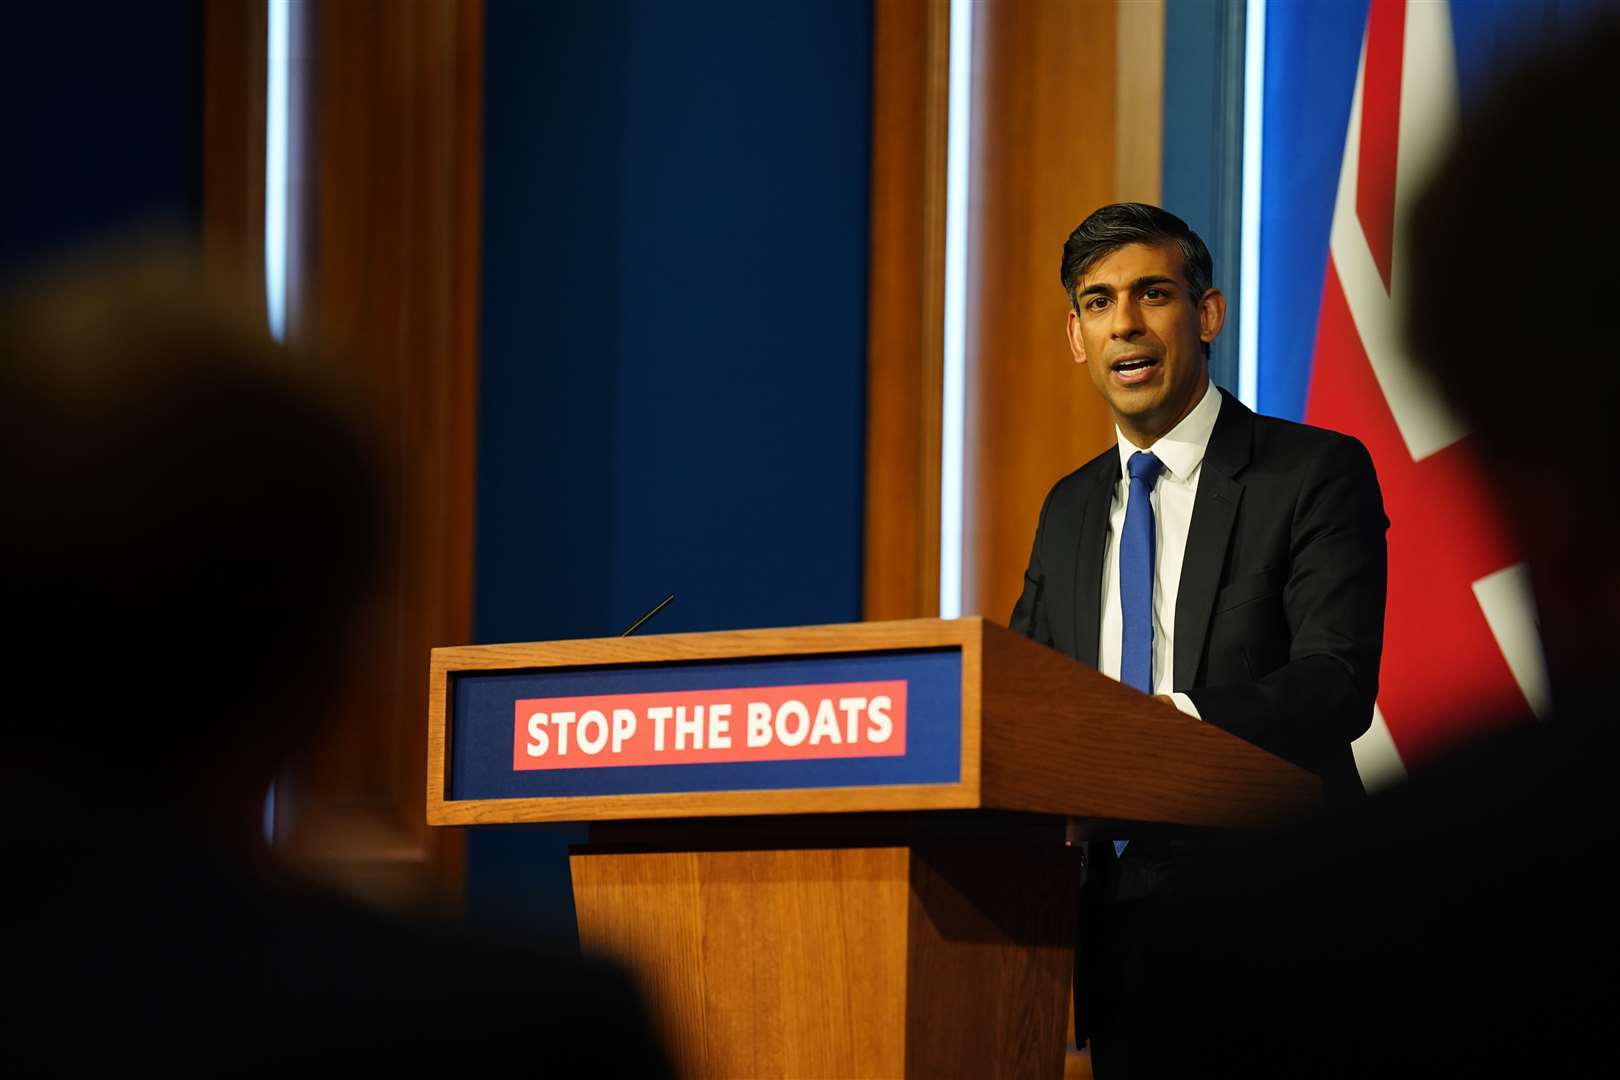 Rishi Sunak defended his proposals at an emergency press conference in Downing Street, where he faced questions about his position (James Manning/PA)